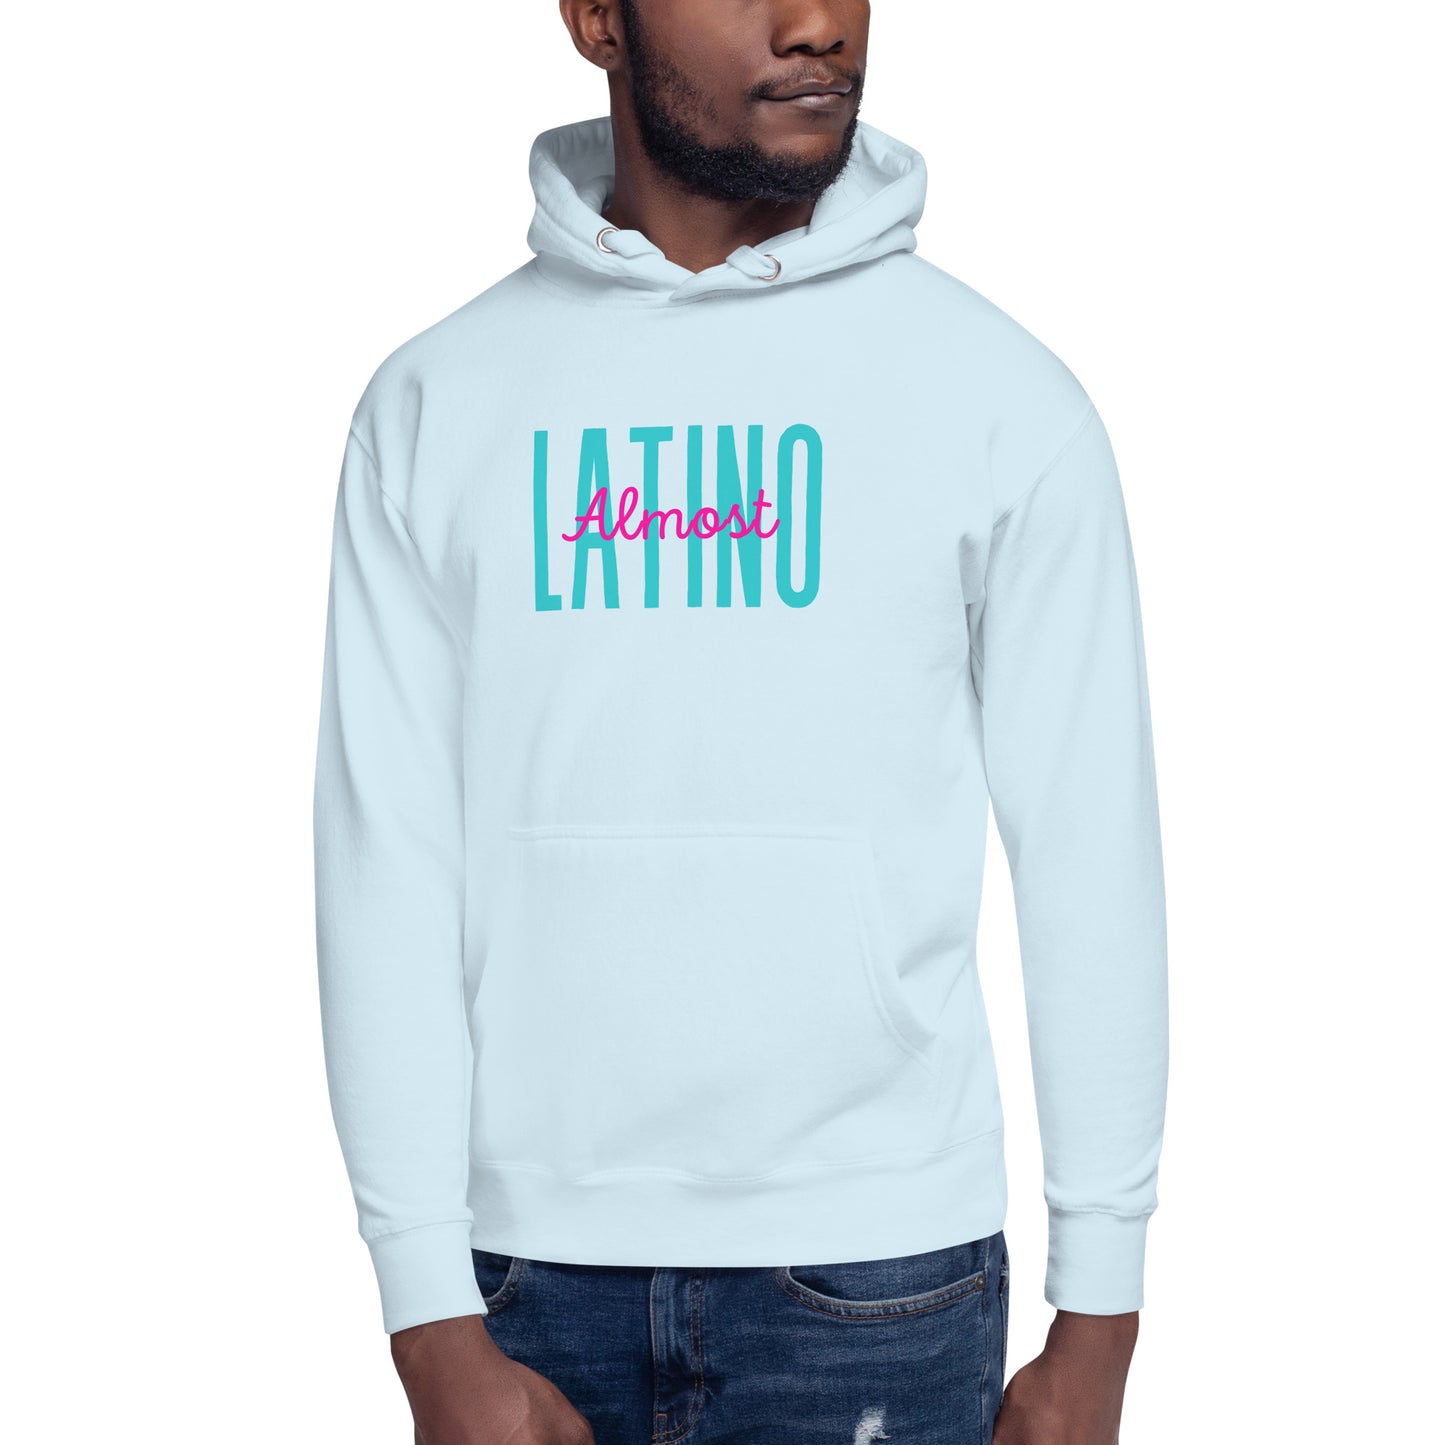 Almost Latino Hoodie